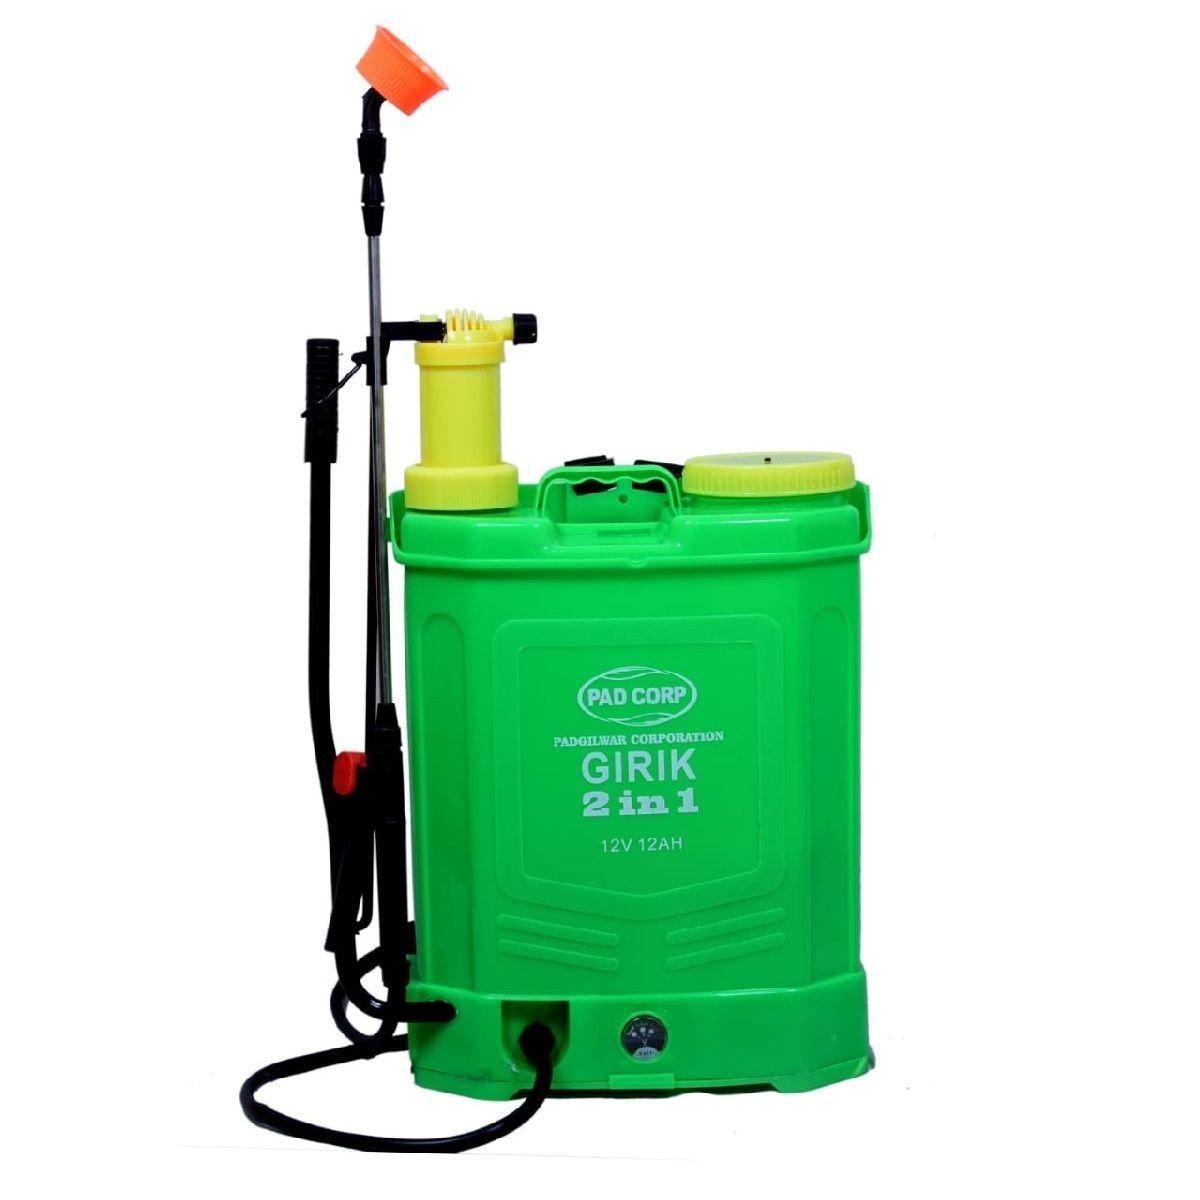 Pad Corp Girik 2 in 1 12A Manual and Battery Operated Sprayer 16L